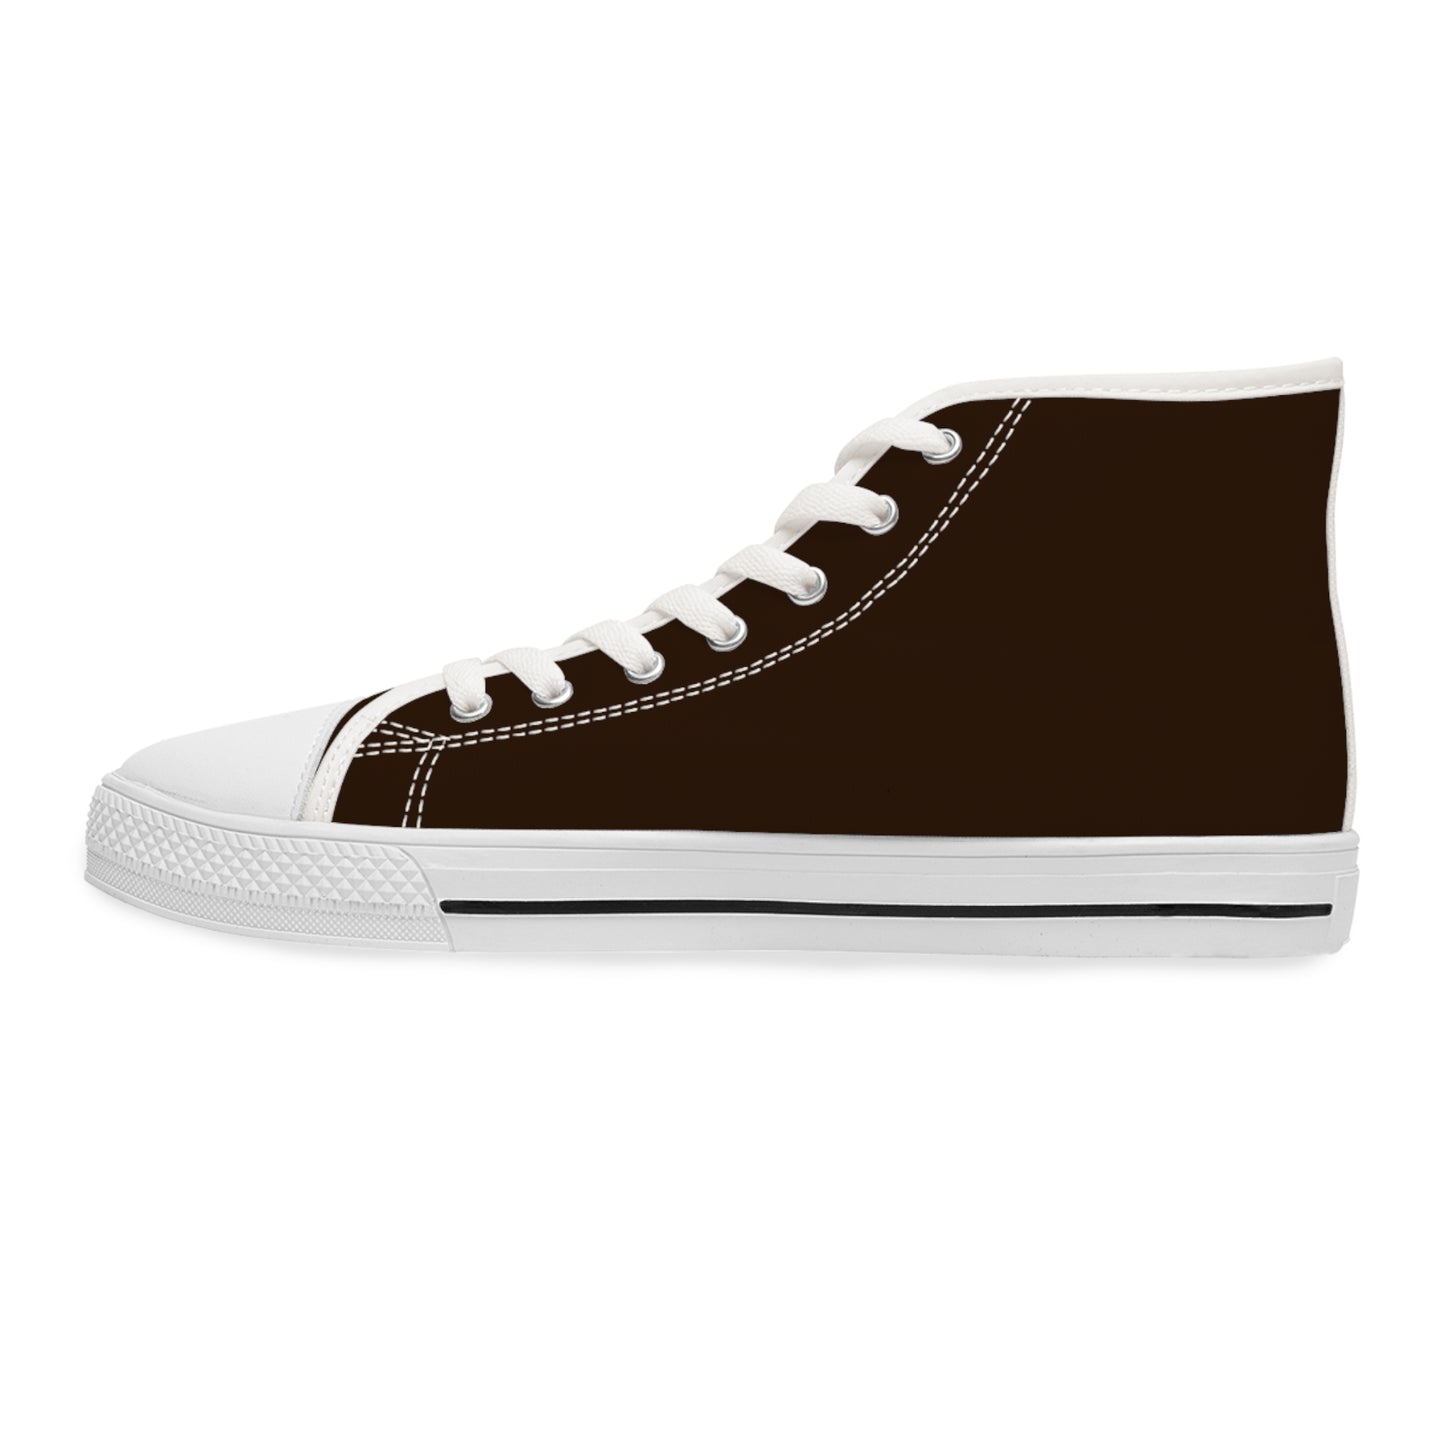 Women's Canvas High Top Solid Color Sneakers - Chocolate Cherry US 12 White sole